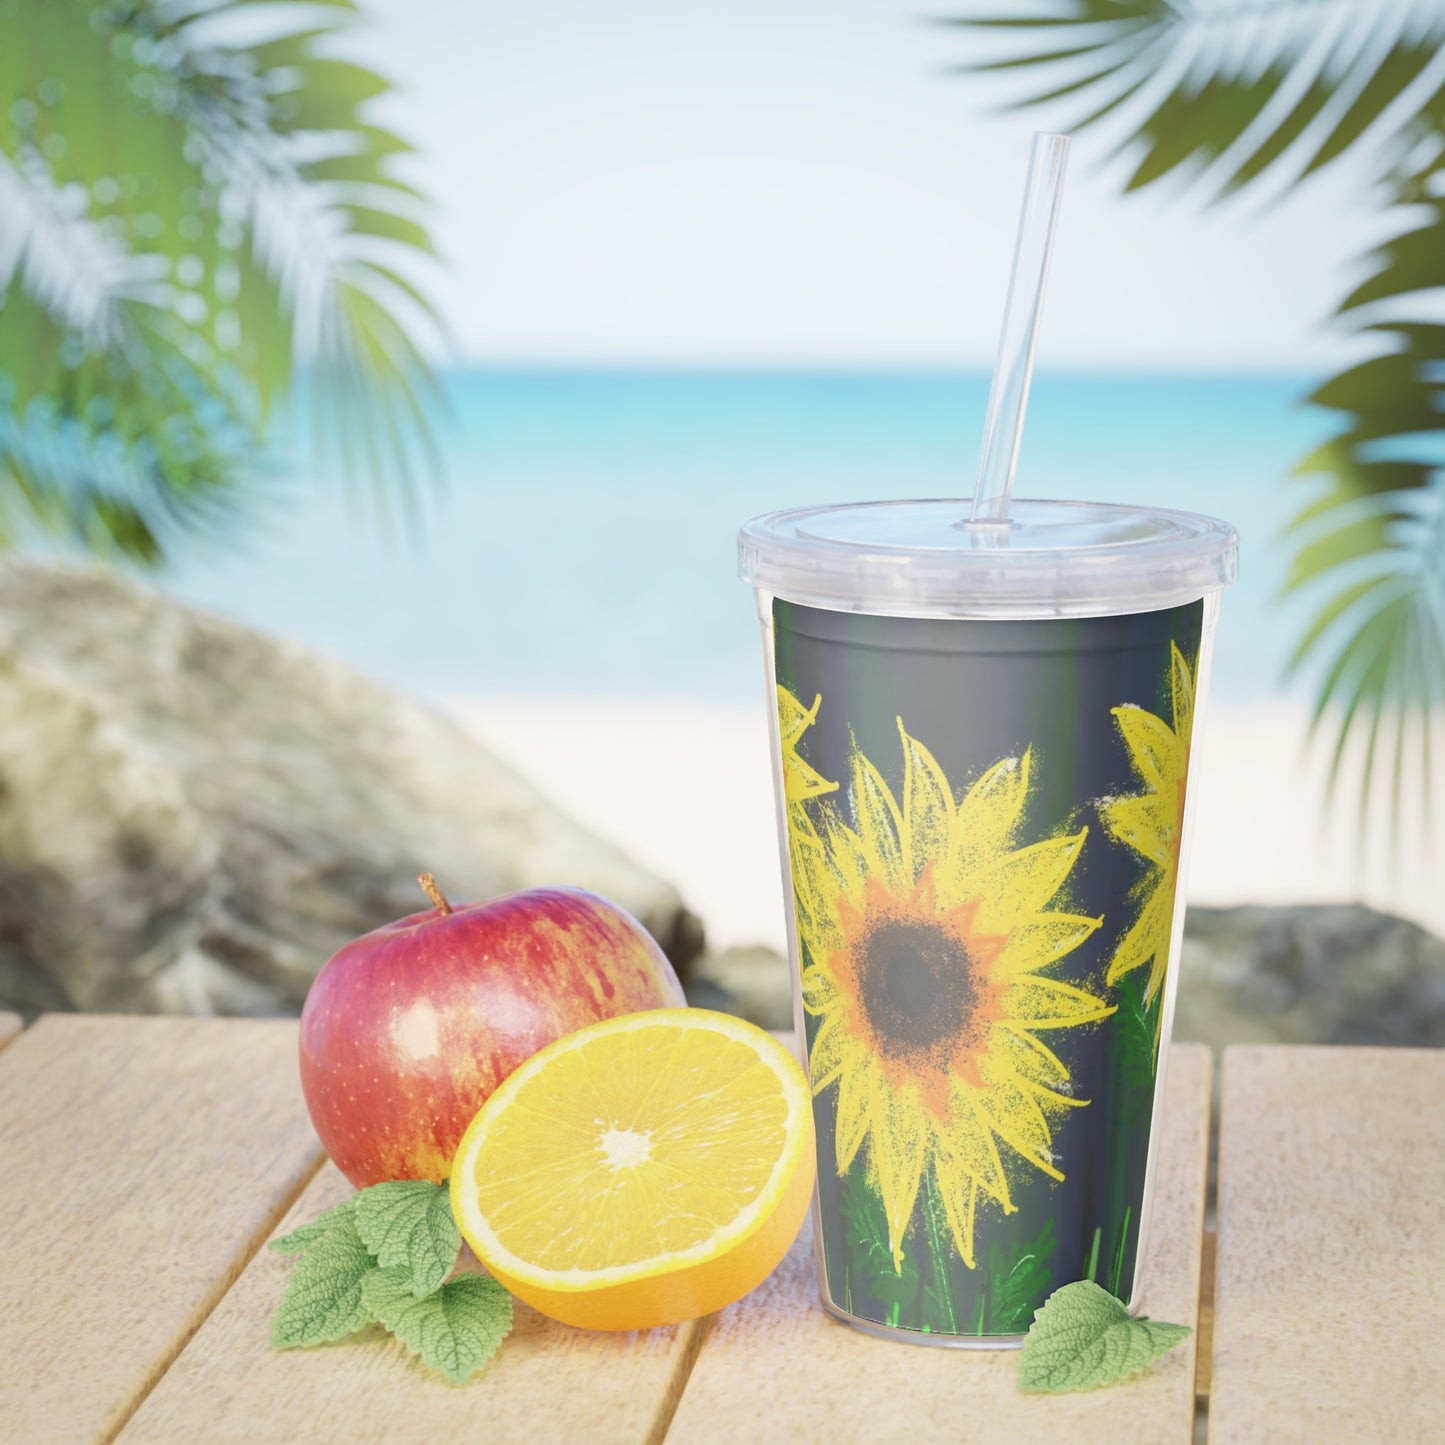 Sunflowers in Chalk - Tumbler with Straw